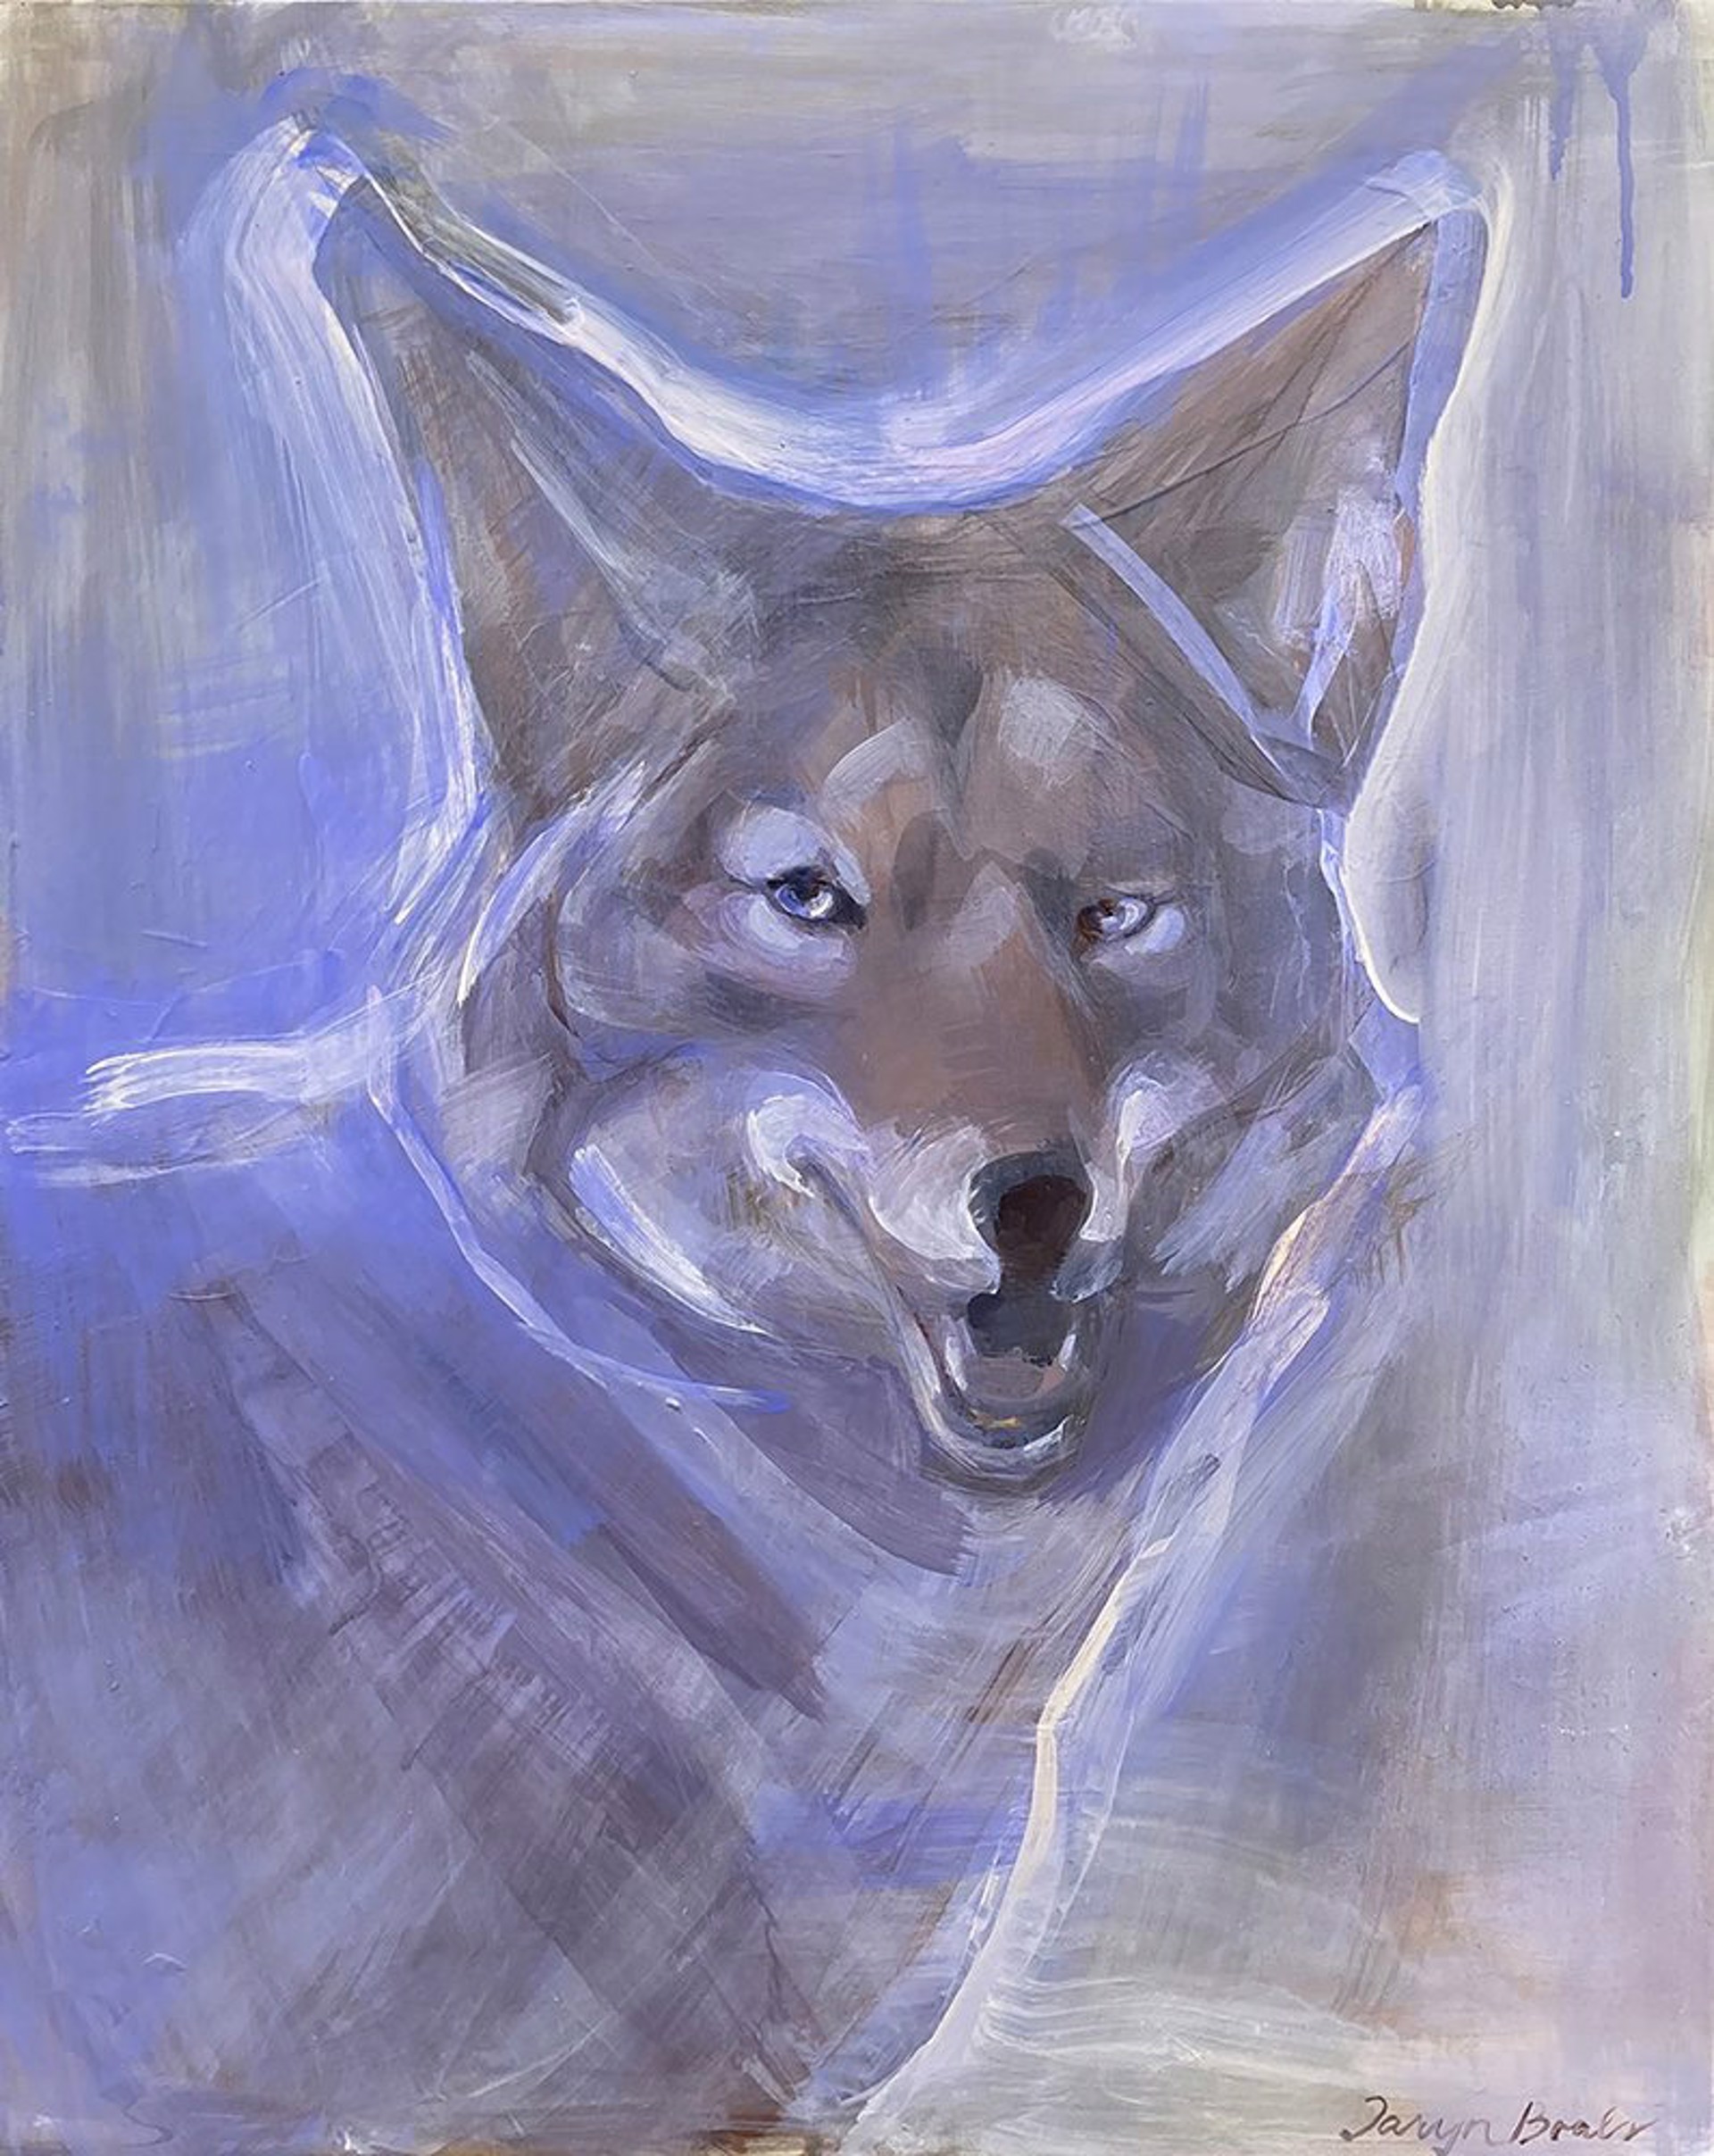 Original Acrylic Painting By Tarn Boals Featuring A Coyote In Blue Expressive Brushwork